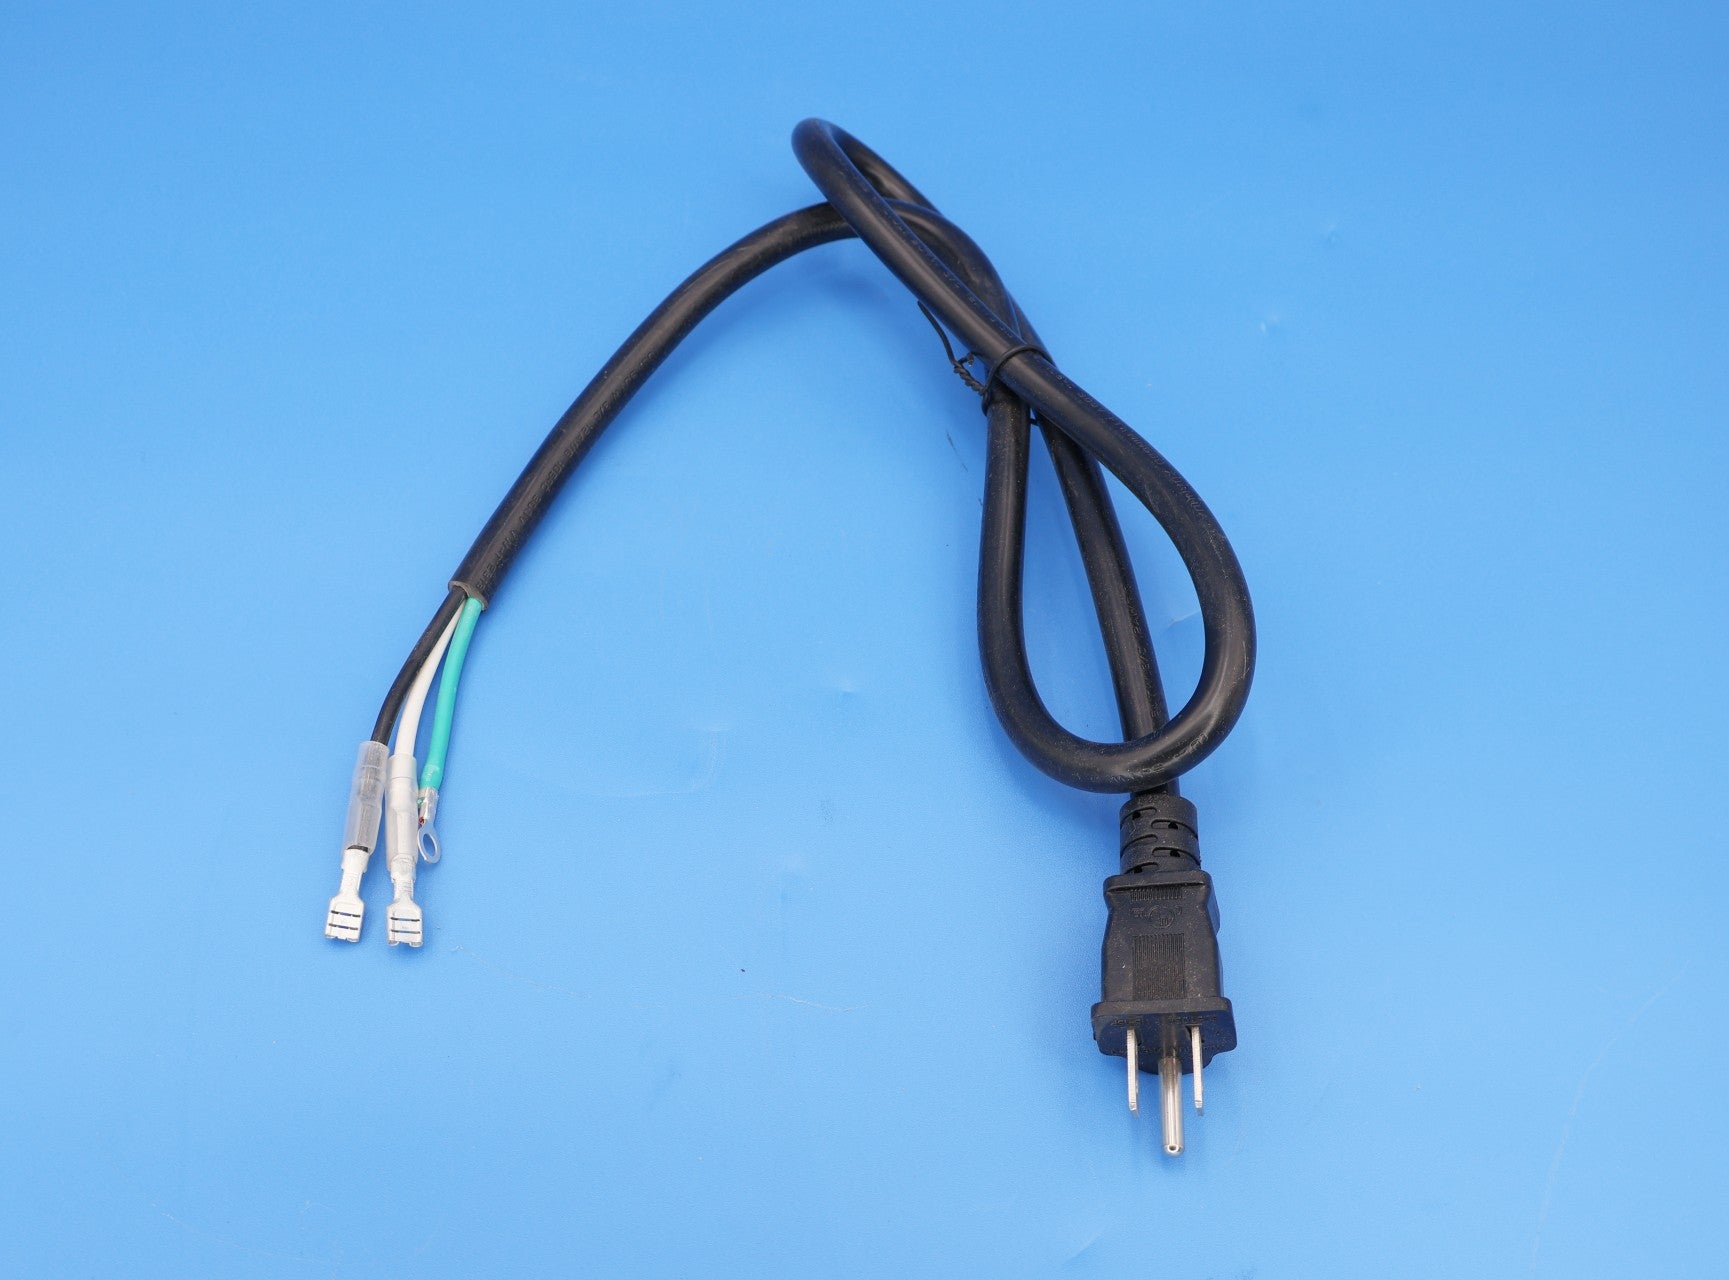 Jandy (Polaris) 3' Power Cord 12 Gauge 3-Wire for Forza Aboveground Pumps R0969300 - Pool Pump Parts - img-1